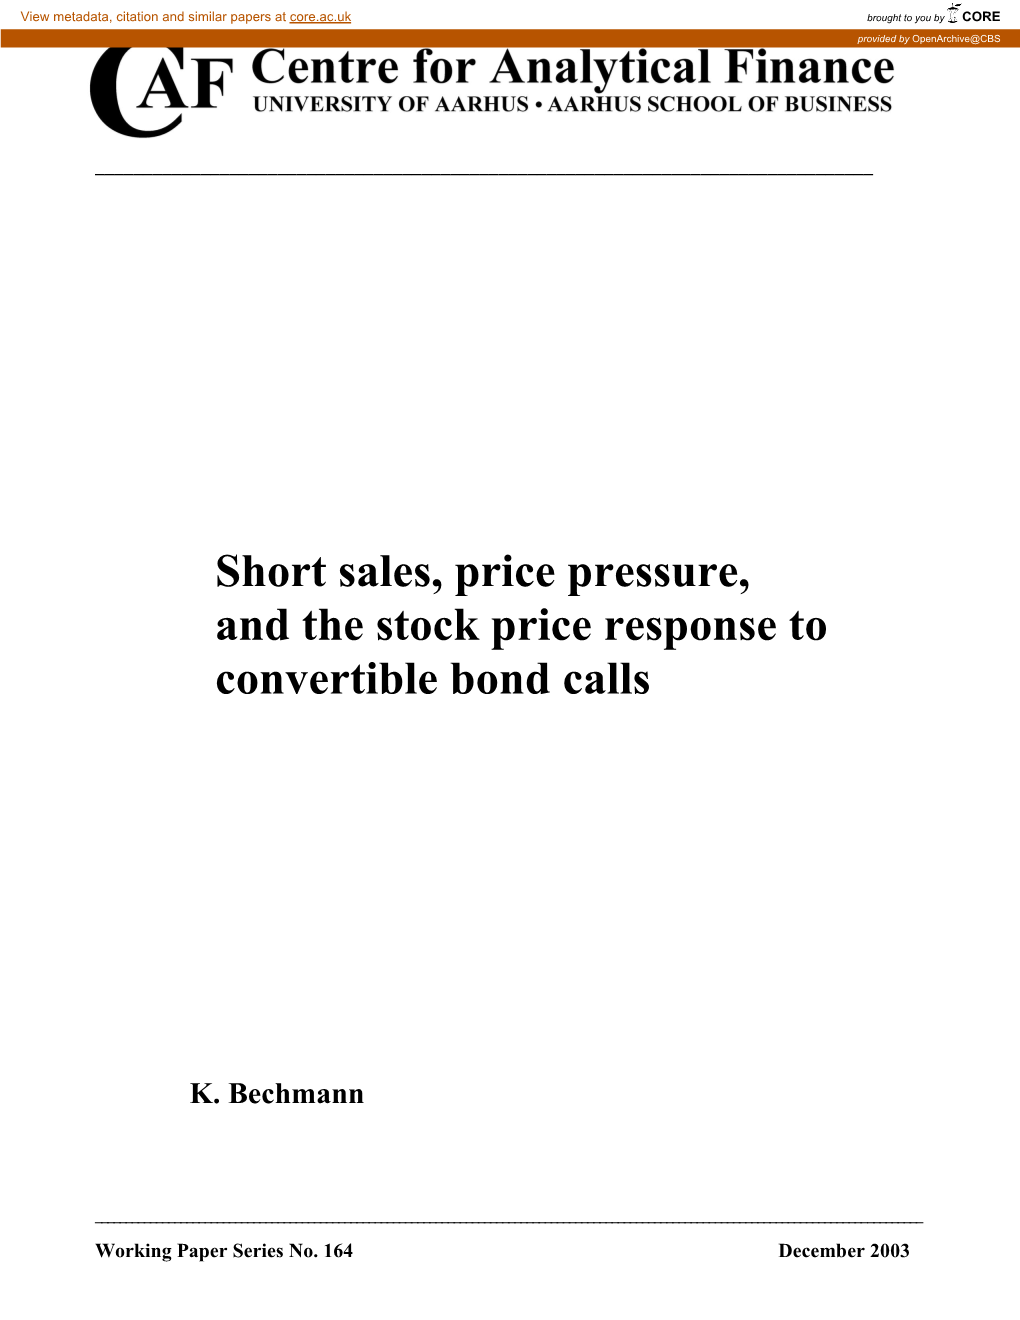 Short Sales, Price Pressure, and the Stock Price Response to Convertible Bond Calls